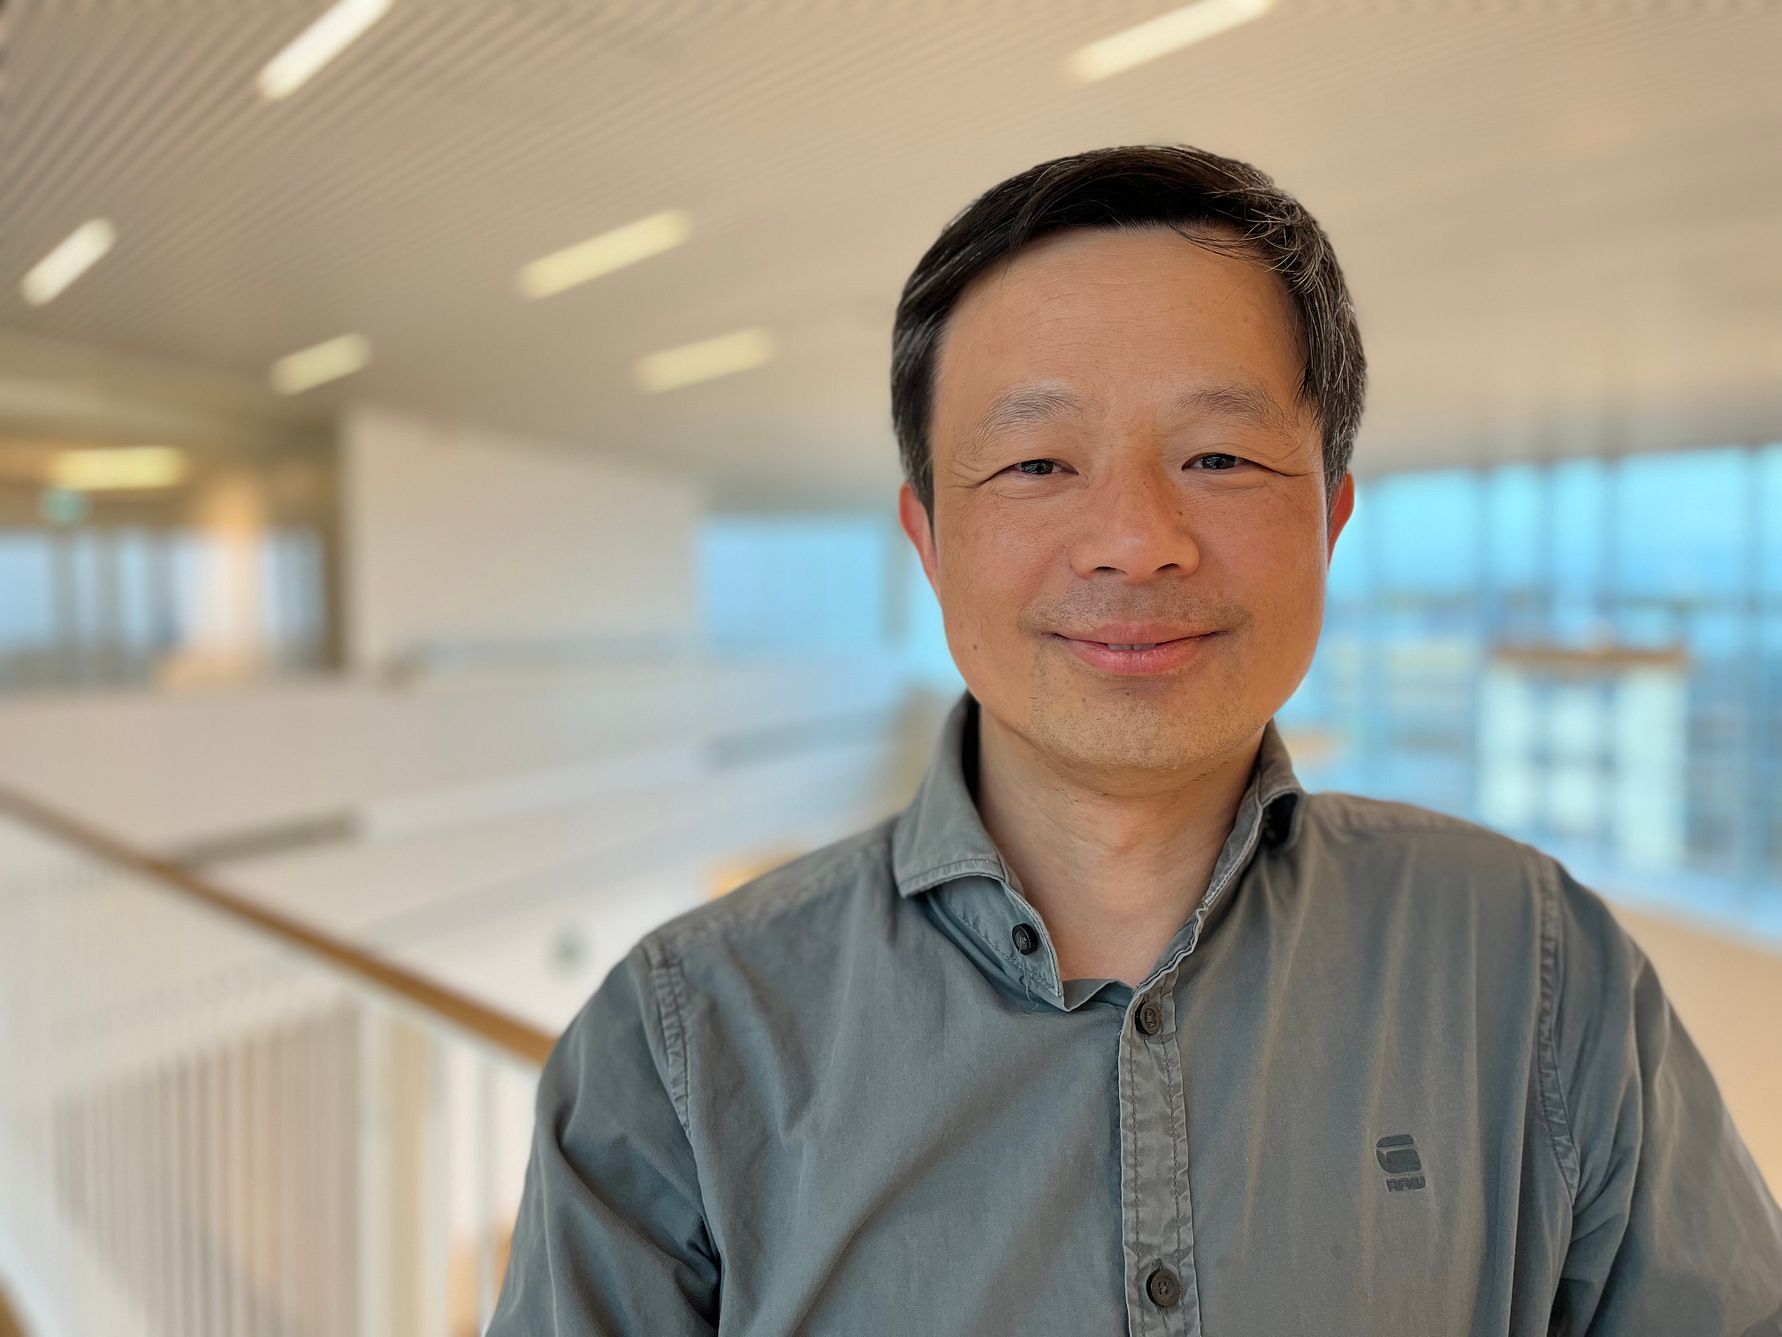 Zhibin Zhang, docent at the Department of Electrical Engineering at Uppsala University.